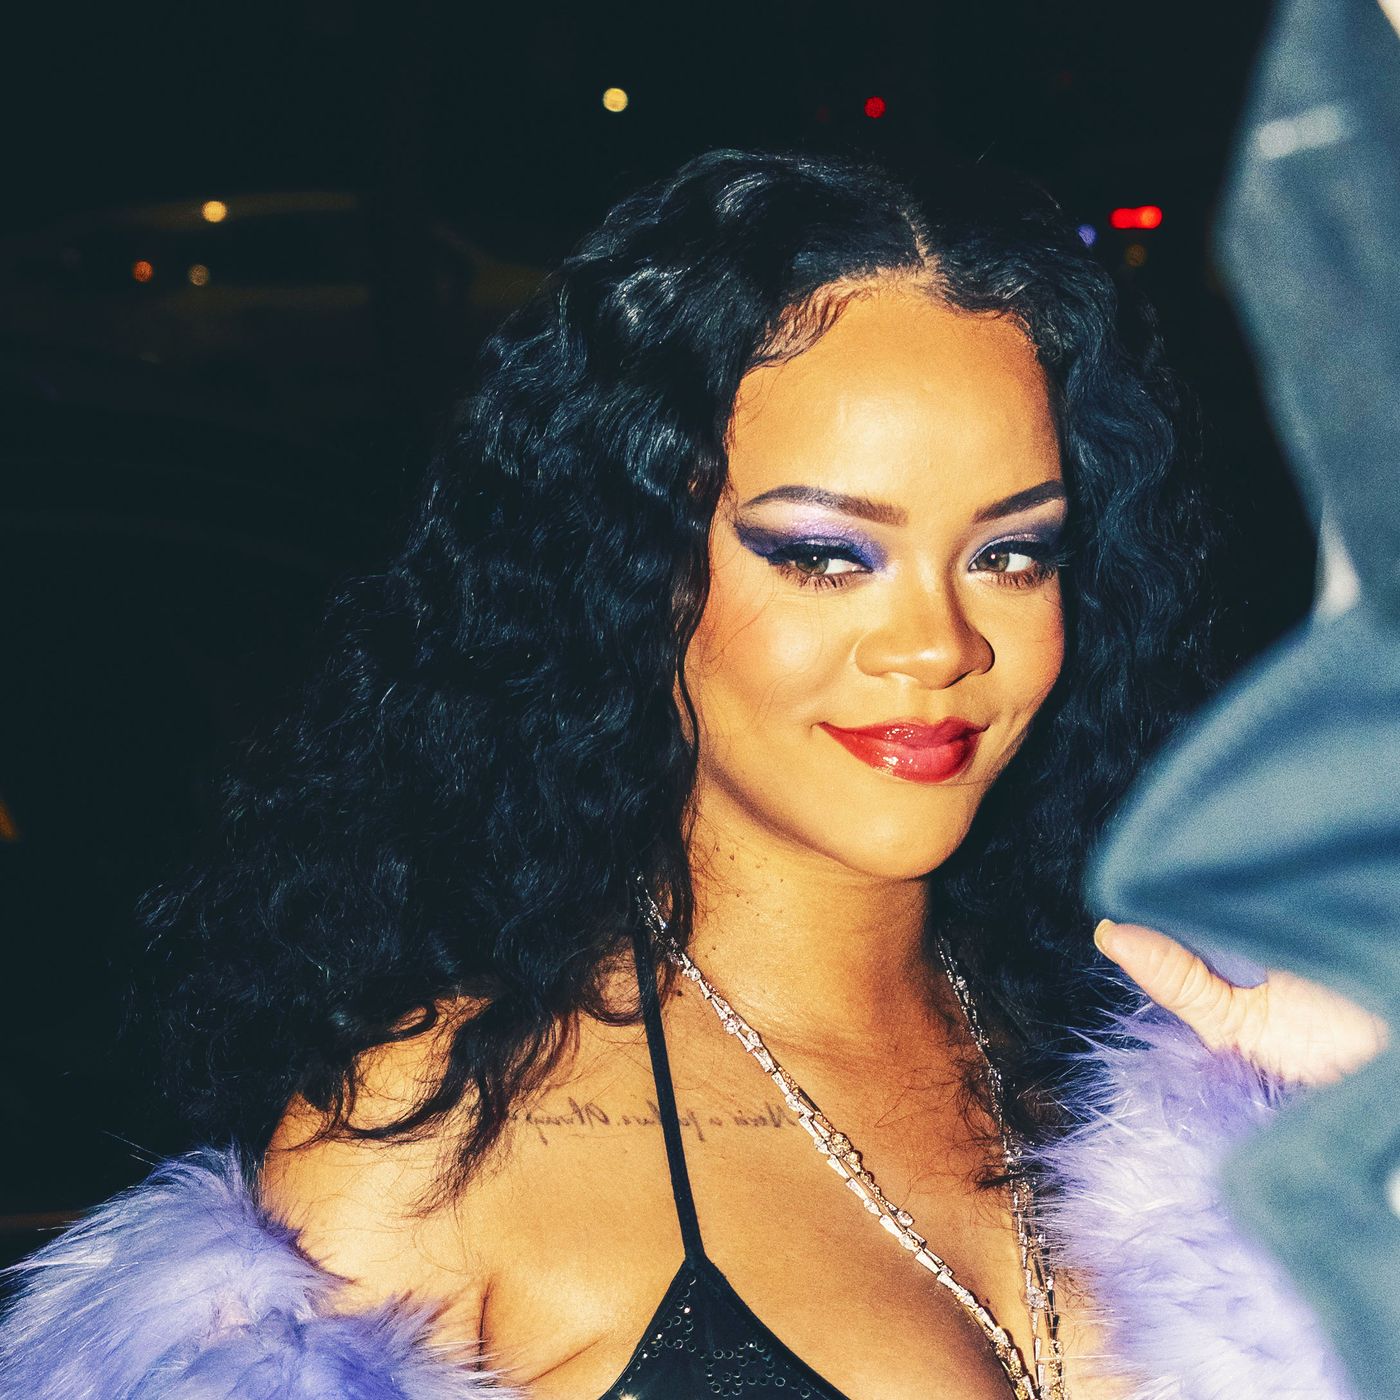 Rihanna Teases New Clothing Line in T Magazine